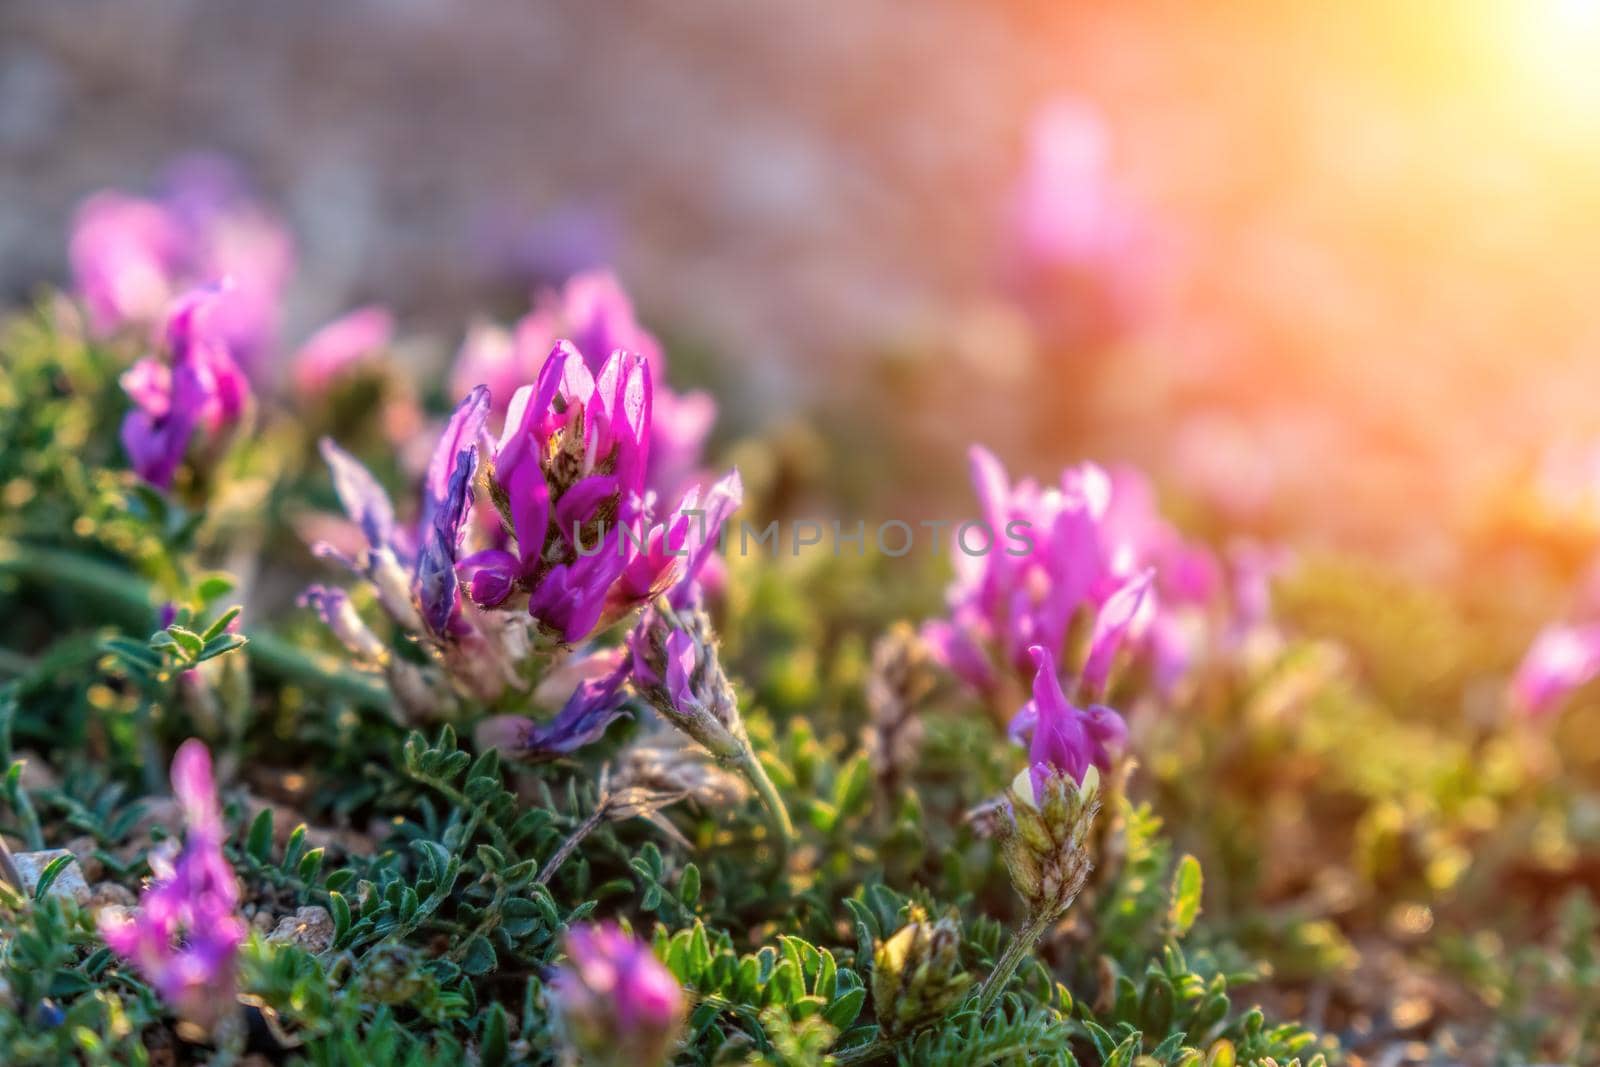 Close up spring or summer background with wild meadow grass and clover flowers in the sunset. Motley grass in sun rays at golden hour. Soft selective focus Beauty tranquil scene. Vibrant nature.